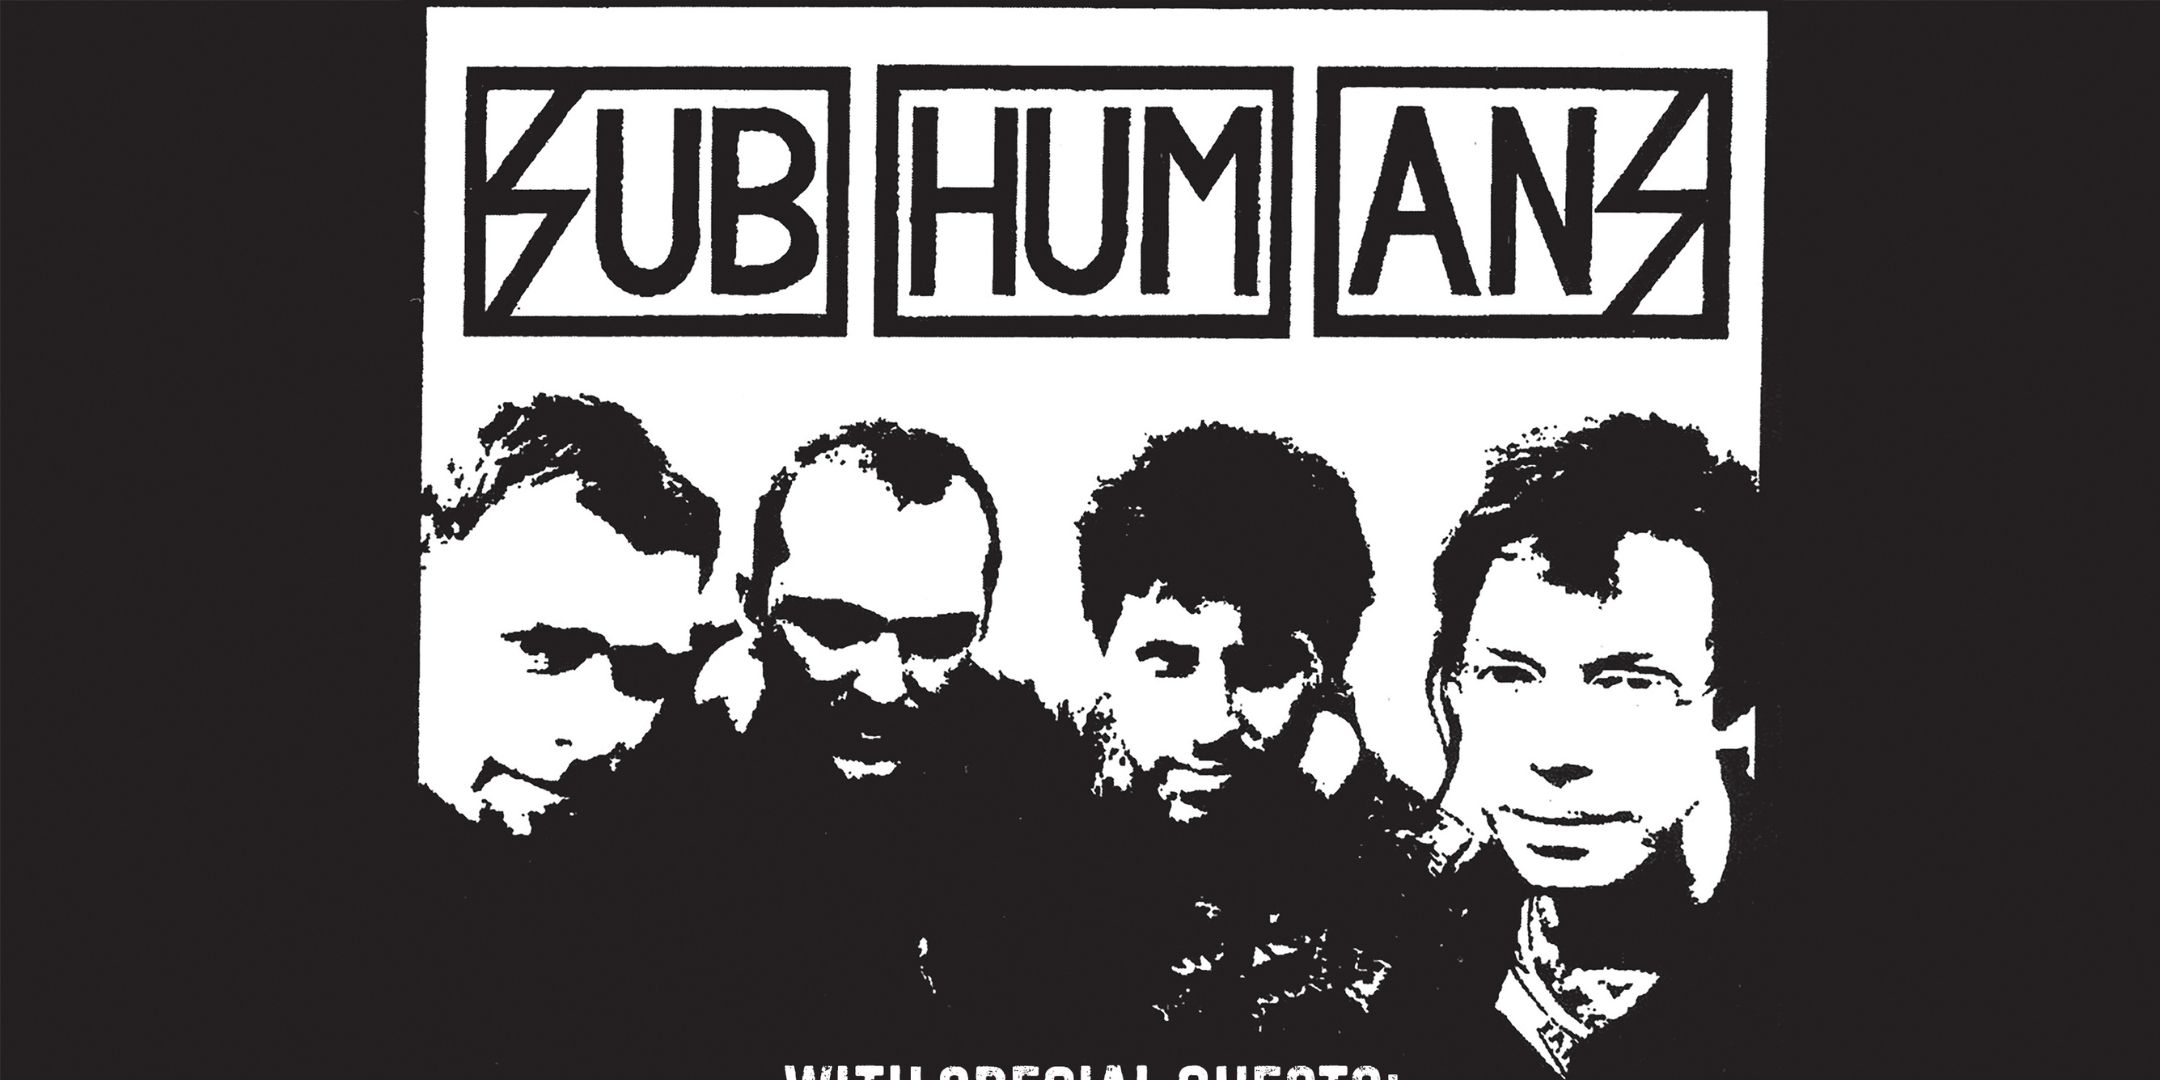 Subhumans War//Plague Cop/Out Surrogates Friday, May 26 James Ballentine "Uptown" VFW Post 246 Doors 7:00pm :: Music 8:00pm :: 21+ GA $20 ADV / $20 DOS NO REFUNDS